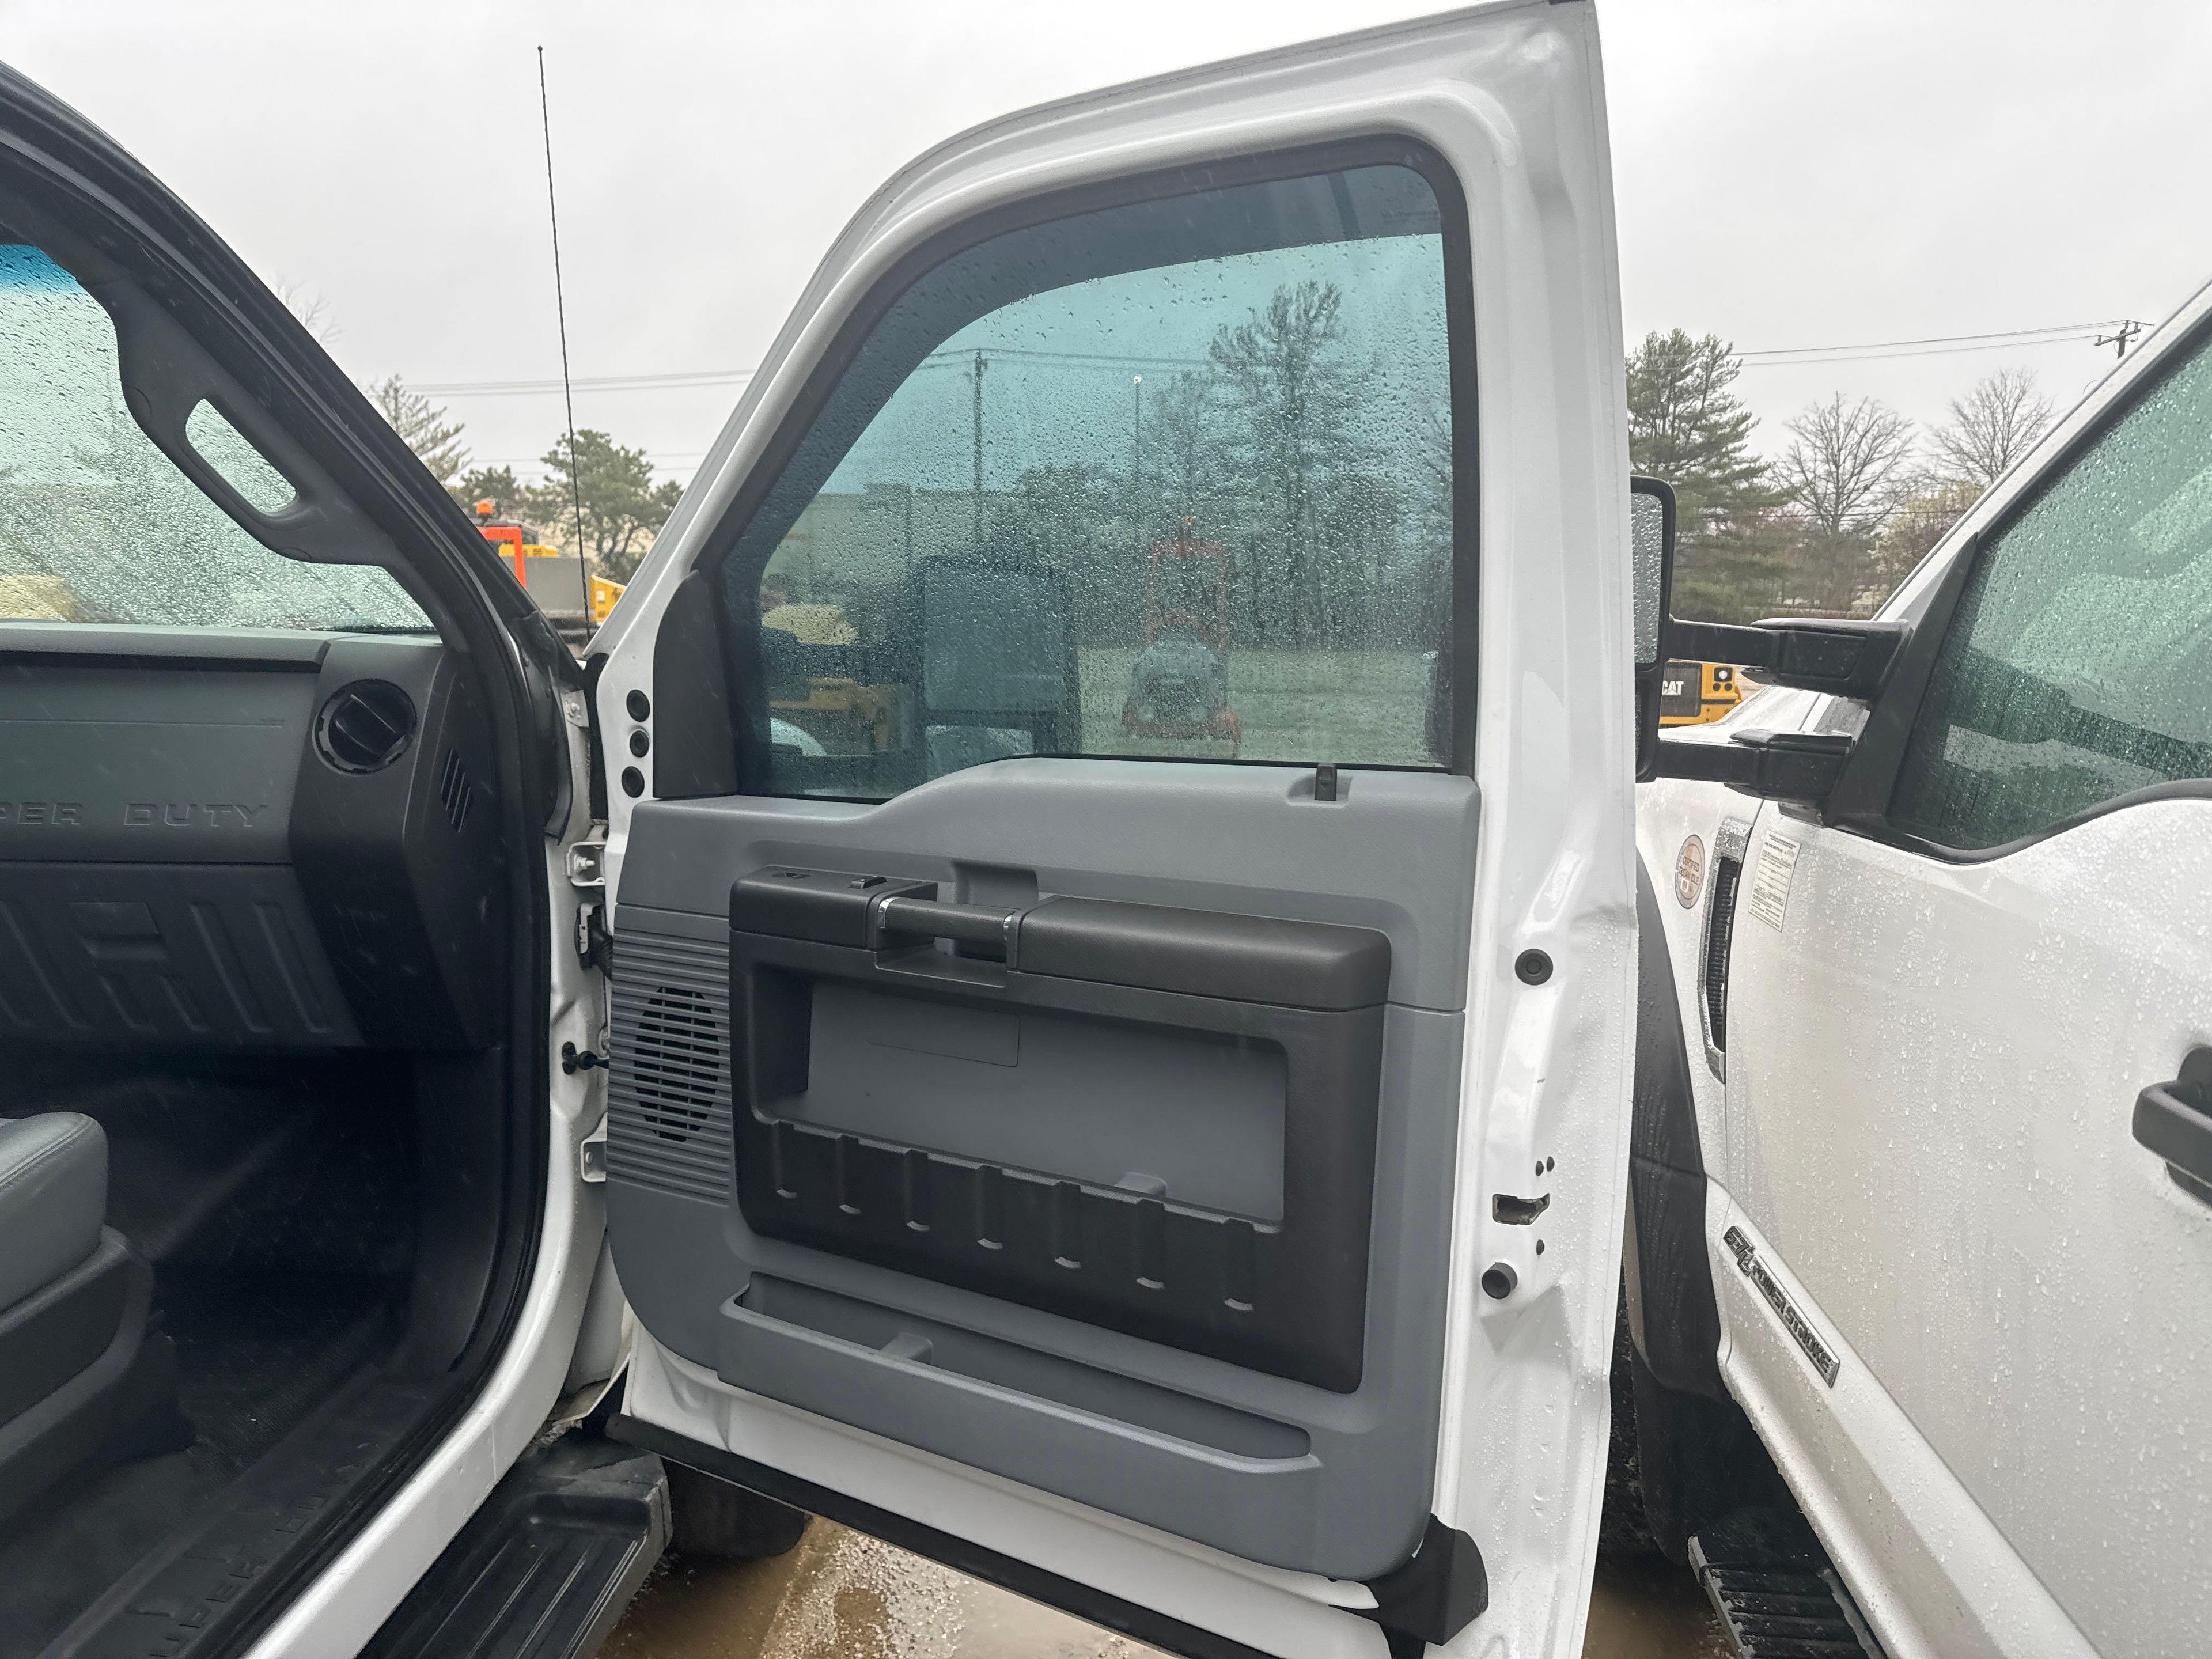 2016 FORD F550 SERVICE TRUCK VN:B45127 powered by diesel engine, equipped with automatic